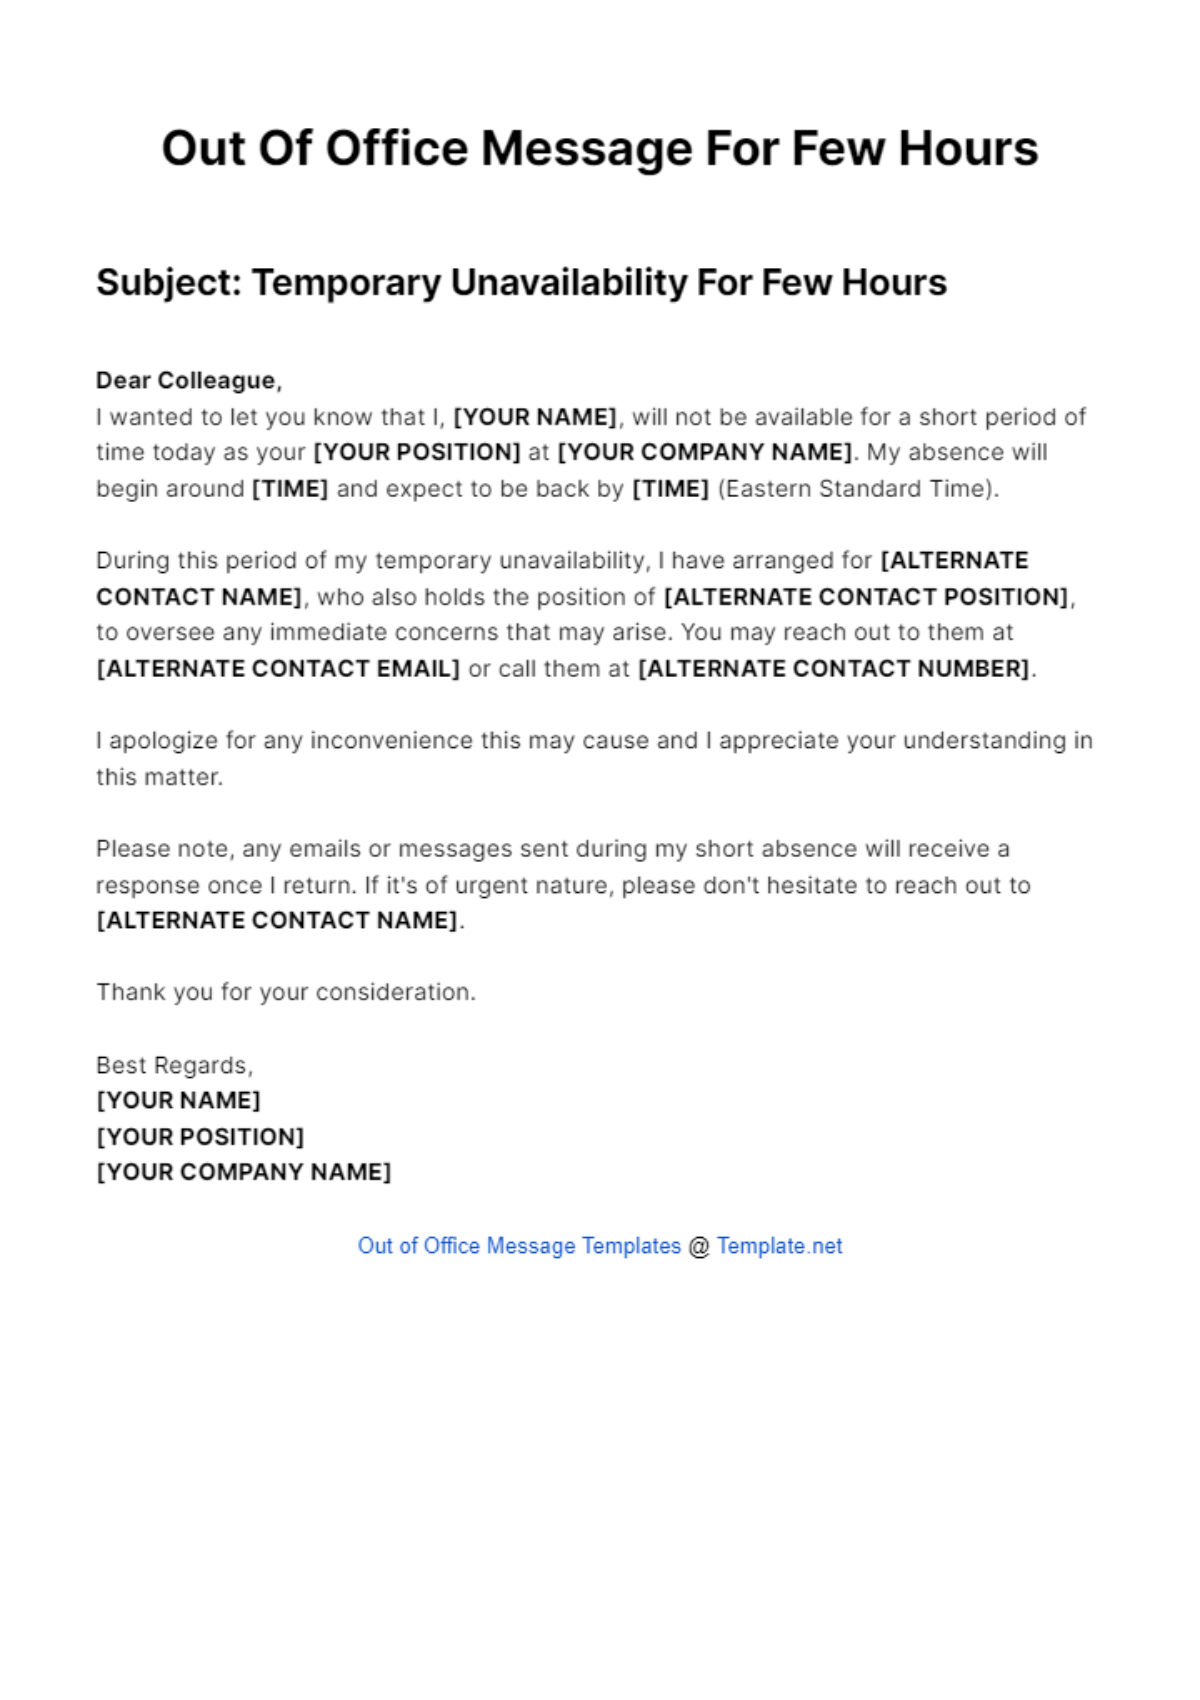 Out Of Office Message For Few Hours Template